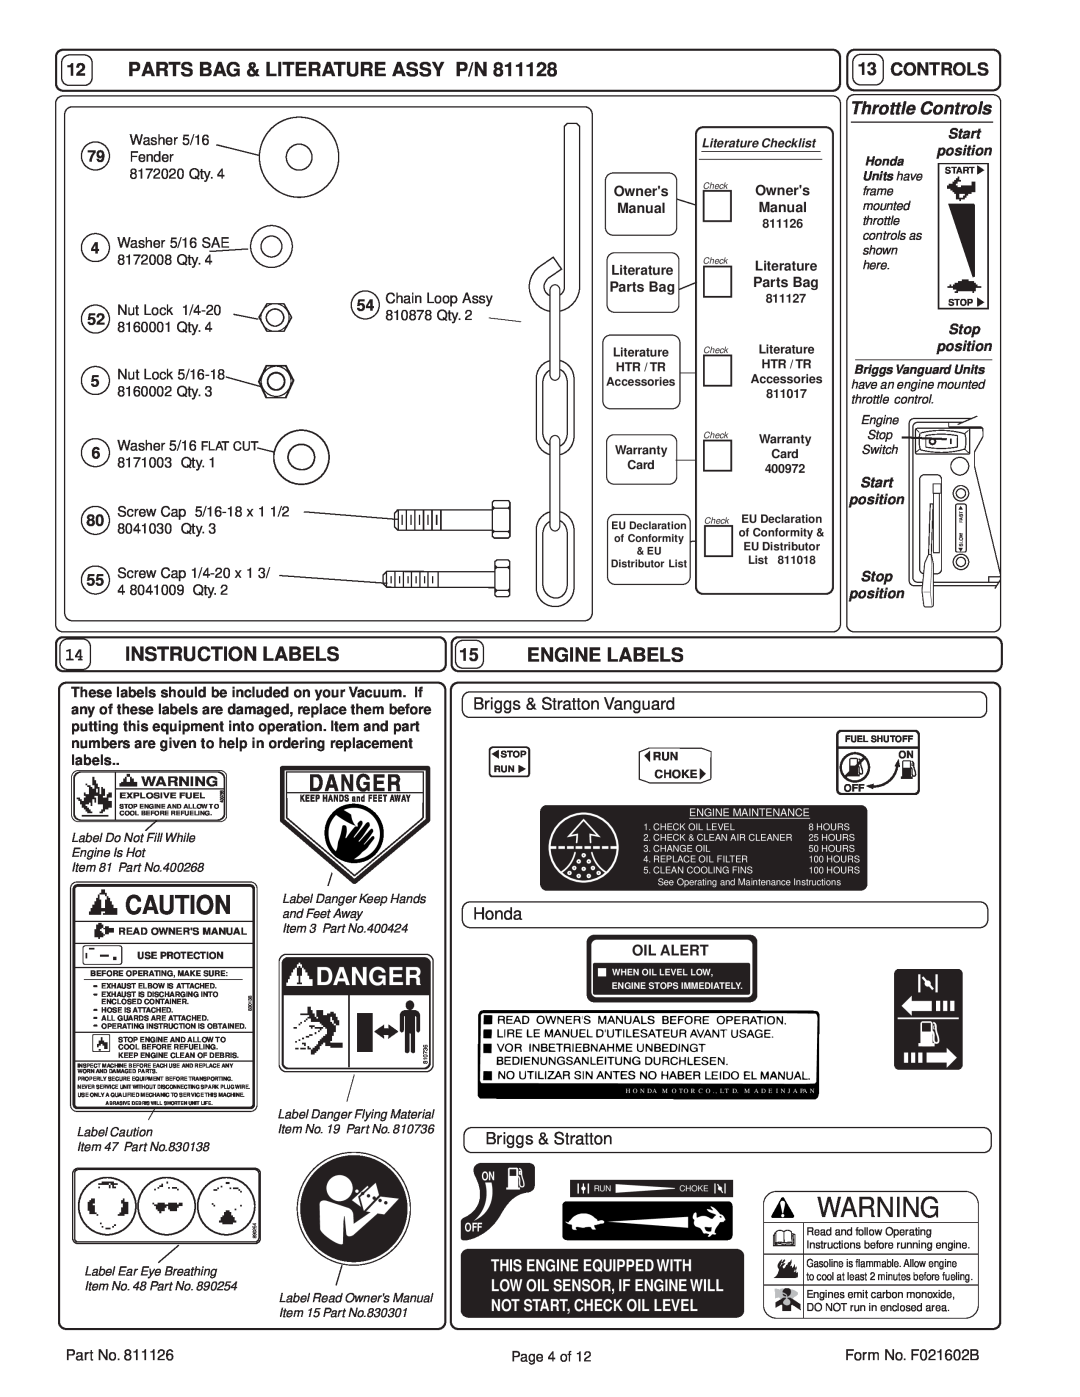 Billy Goat TR1303H Parts Bag & Literature Assy P/N, Instruction Labels, Engine Labels, Controls, Honda, Briggs & Stratton 